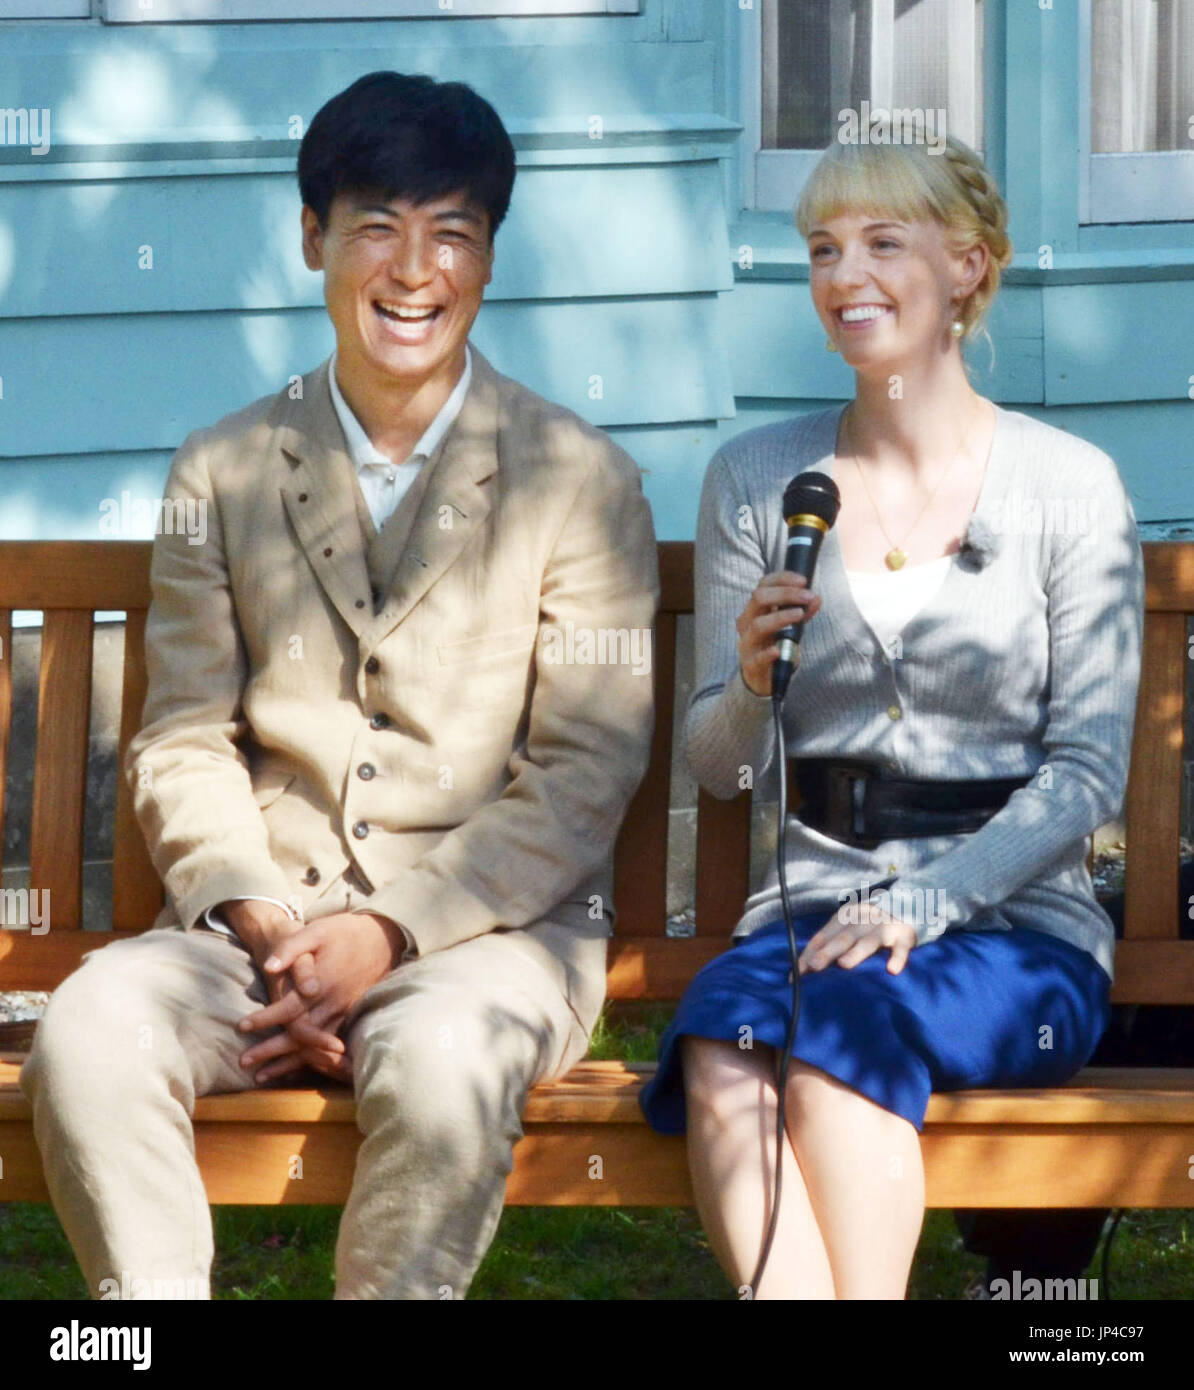 SAPPORO, Japan - Japanese actor Tetsuji Tamayama (L) and U.S. actress Charlotte Kate Fox, a pair of leads in public broadcaster NHK's new serial morning drama 'Massan,' attend a press conference at a distillery of Nikka Whisky Distilling Co. in Yoichi, Hokkaido Prefecture, on June 2, 2014. The program, featuring the life of Japanese whiskey pioneer Masataka Taketsuru, will start in September. (Kyodo) Stock Photo